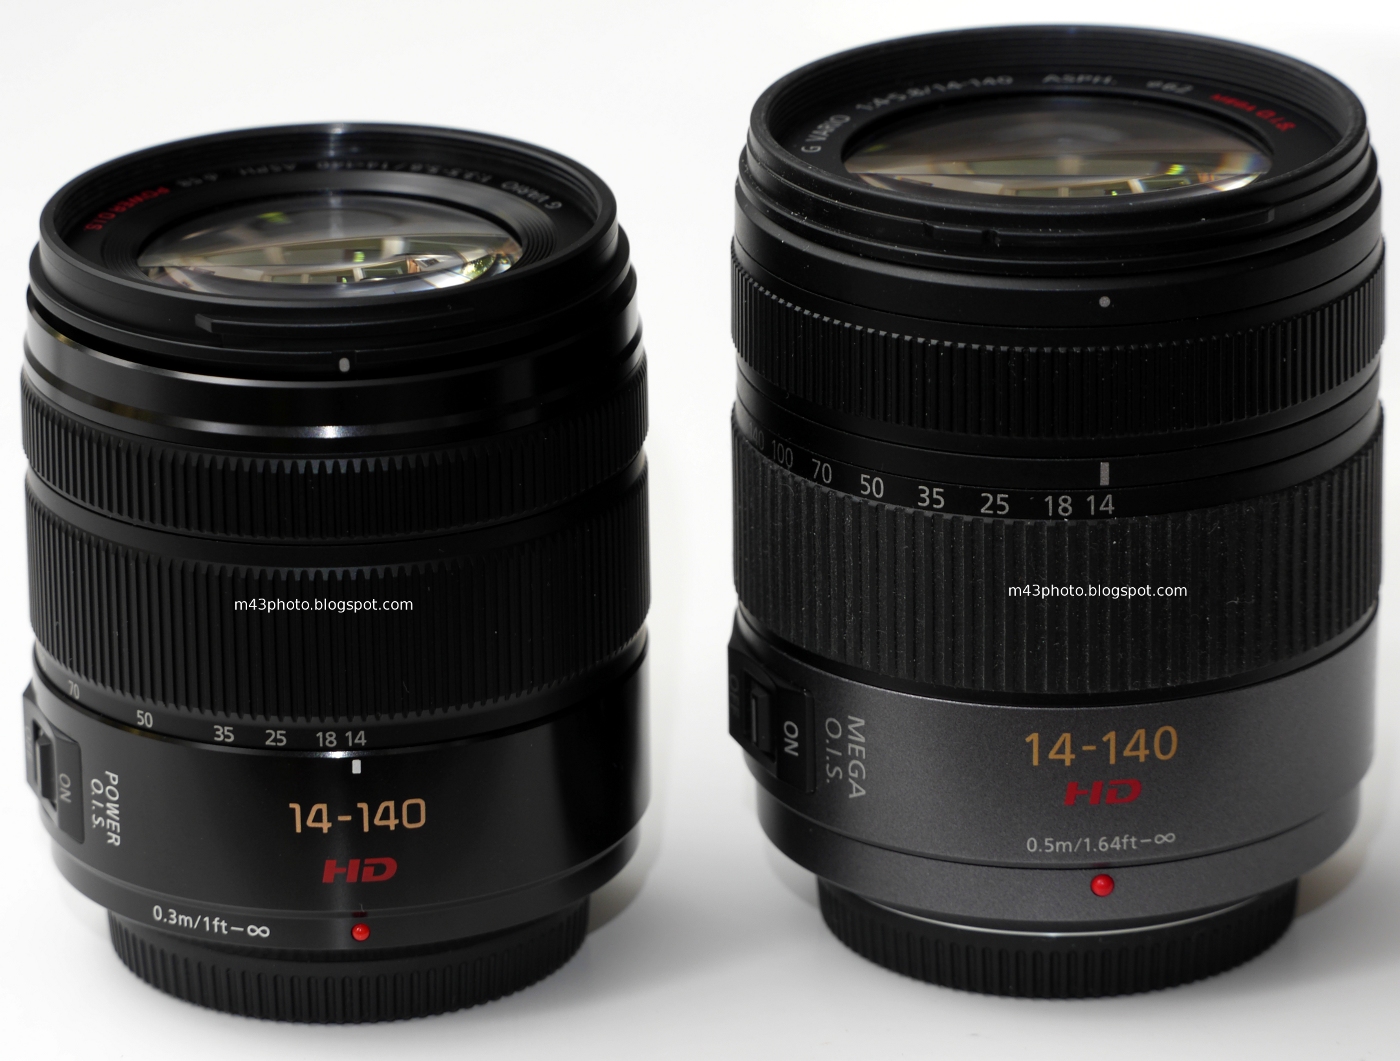 Micro 4/3rds Photography: Lumix G HD 14-140mm f/3.5-5.6 review